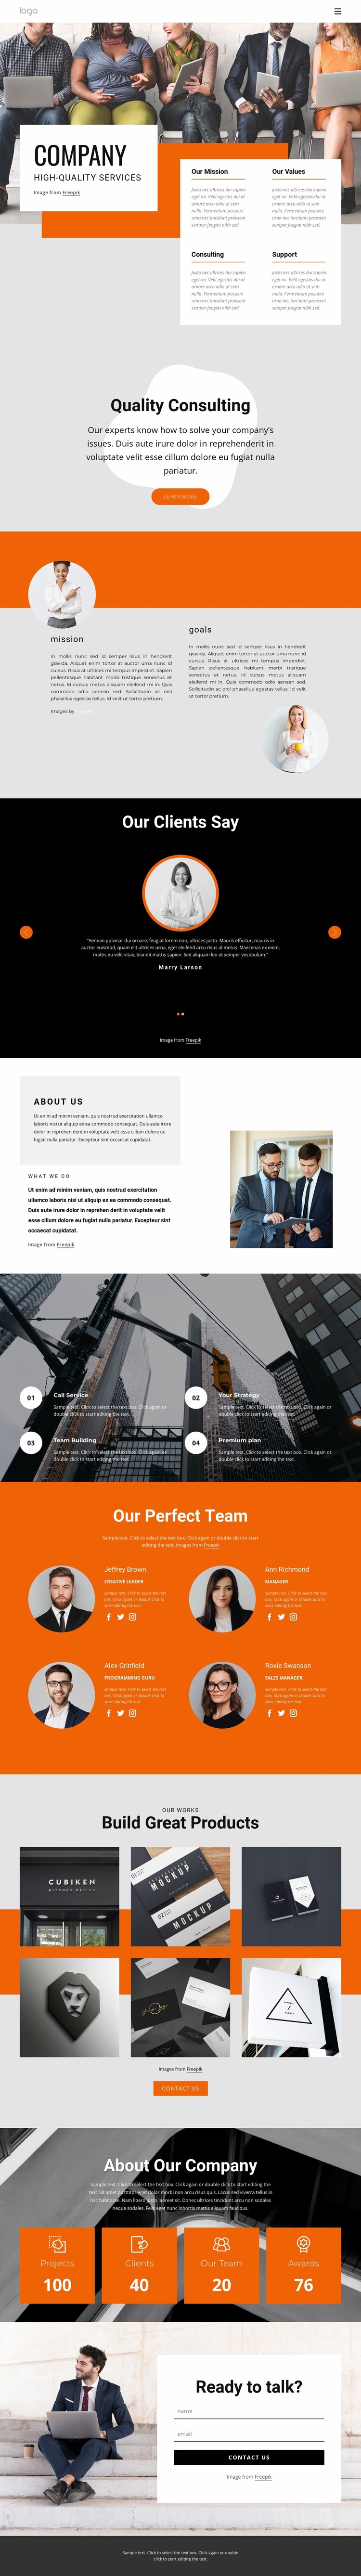 Hight quality consulting firm Html Website Builder